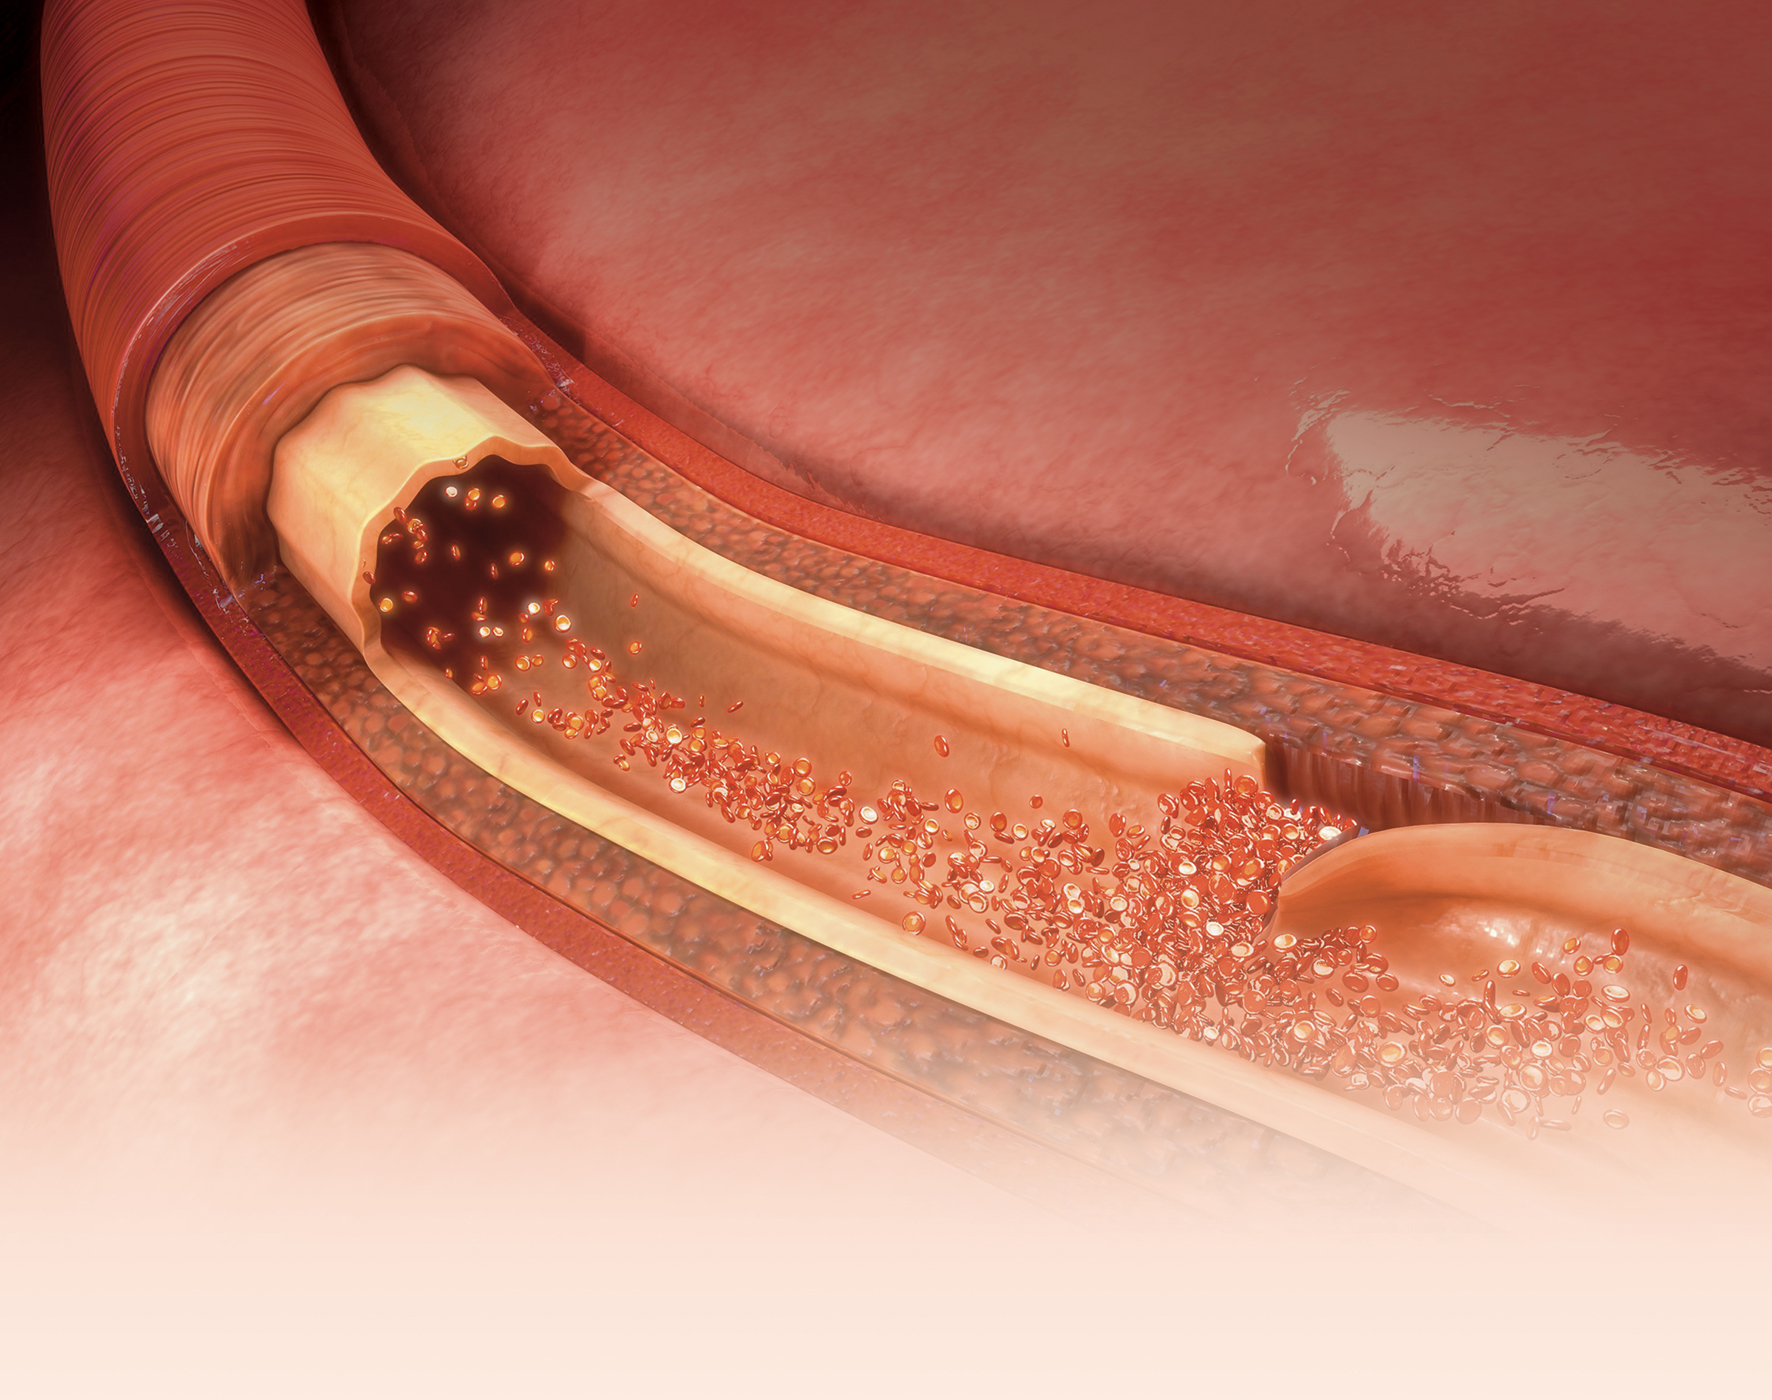 Spontaneous Coronary Artery Dissection — Not Just an Ordinary Heart Attack